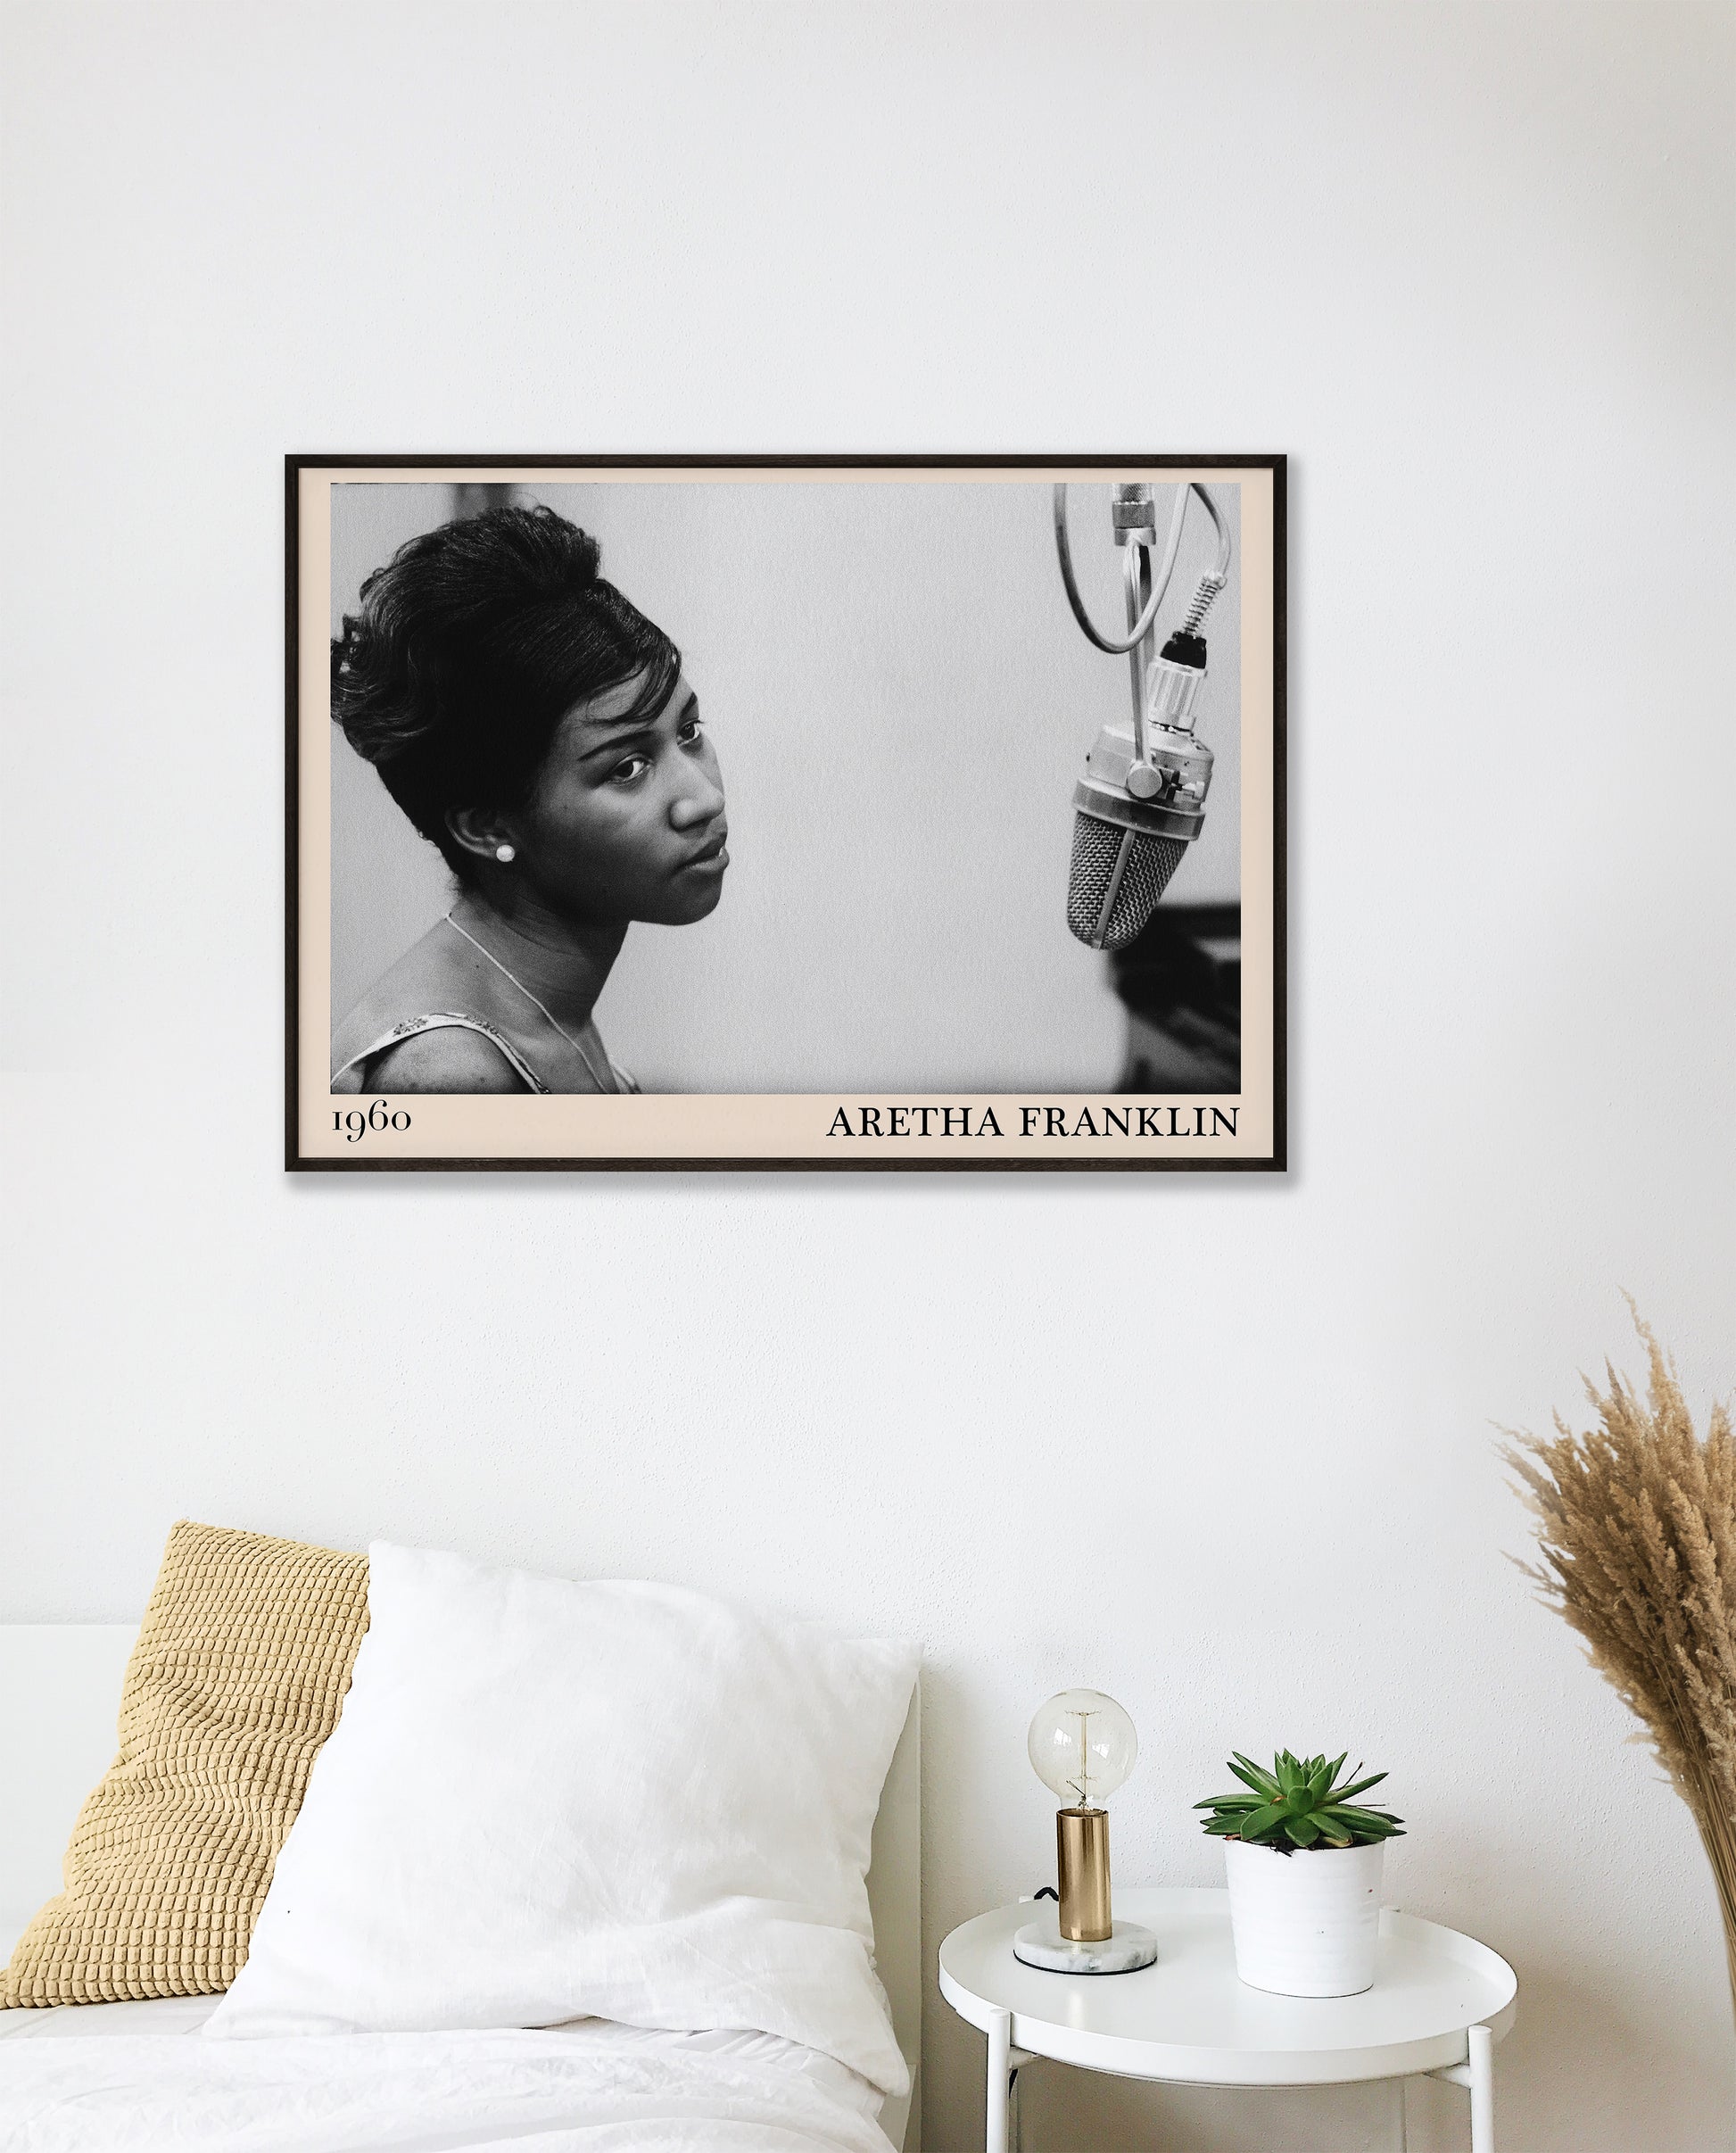 Aretha Franklin Framed Poster on a white bedroom wall